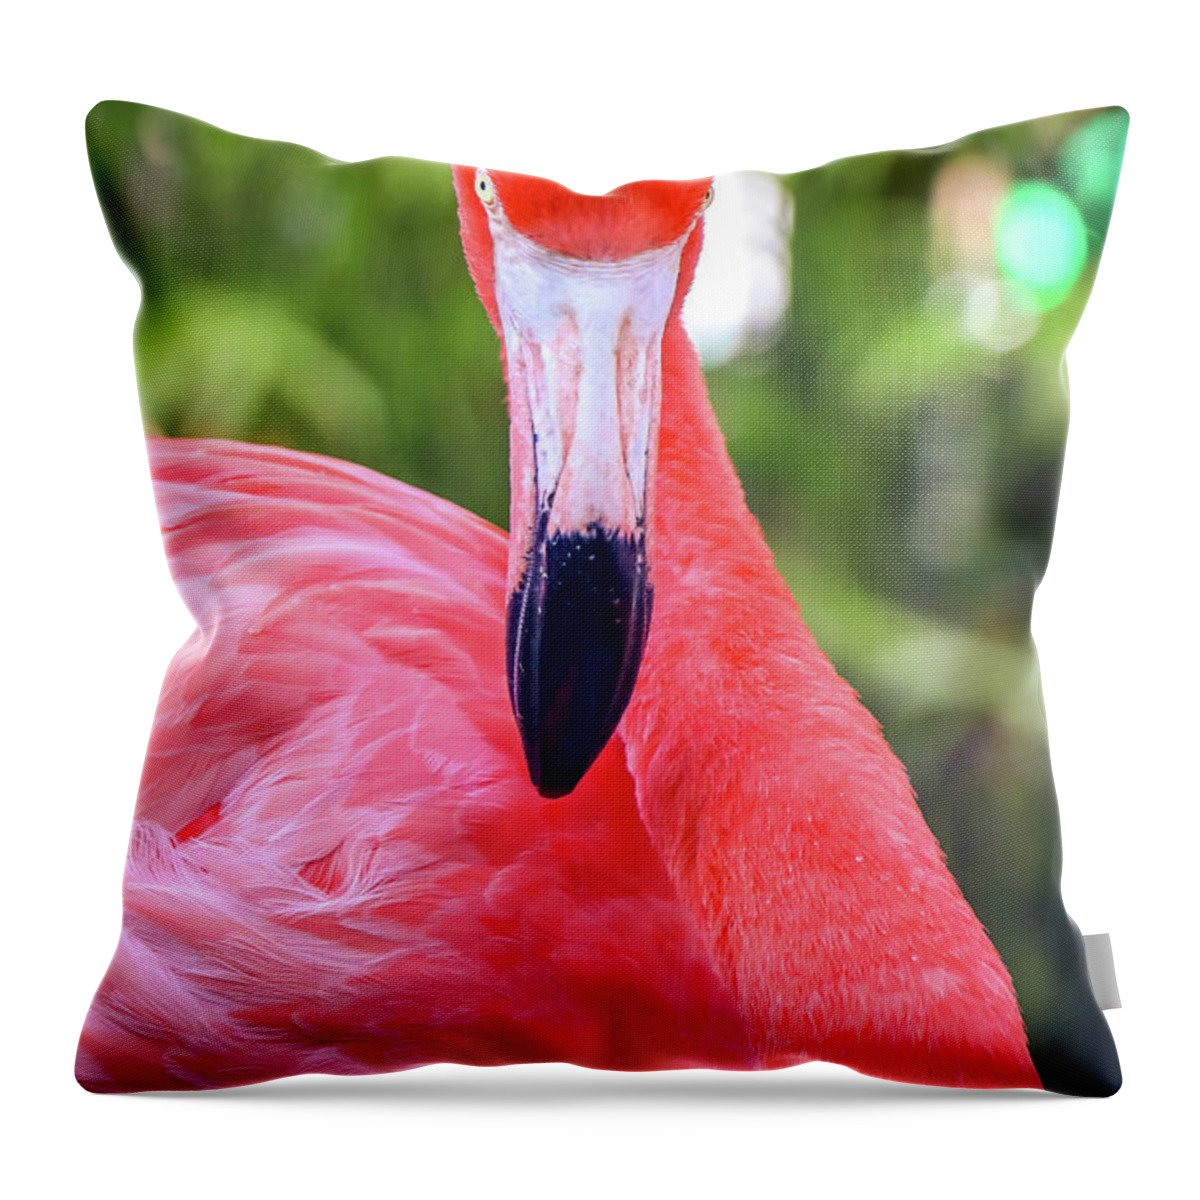 Costa Maya Mexico Throw Pillow featuring the photograph Costa Maya Mexico #35 by Paul James Bannerman